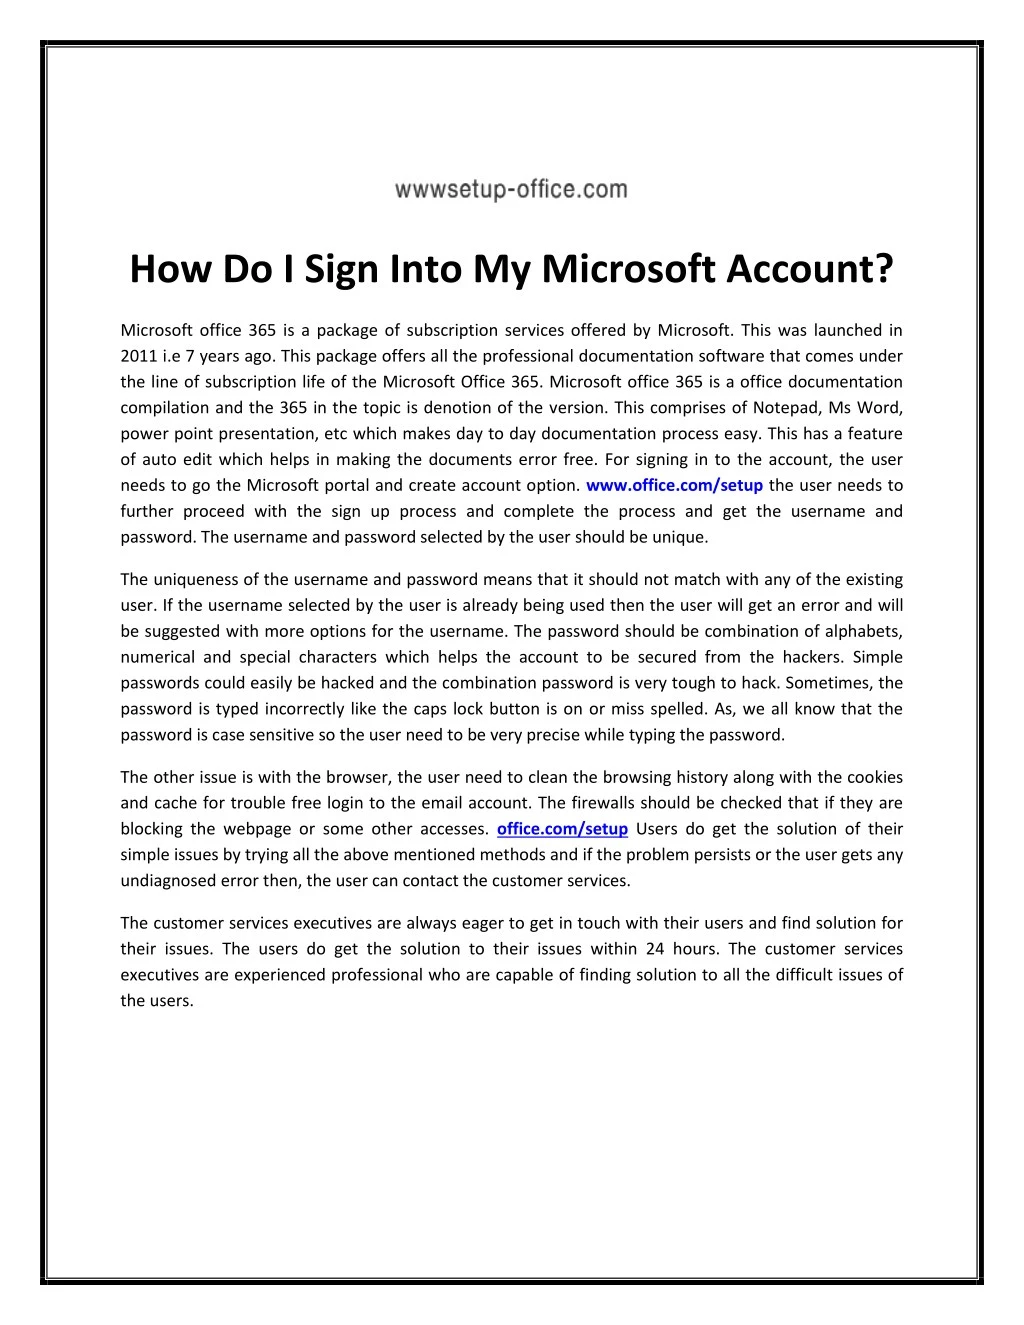 how do i sign into my microsoft account